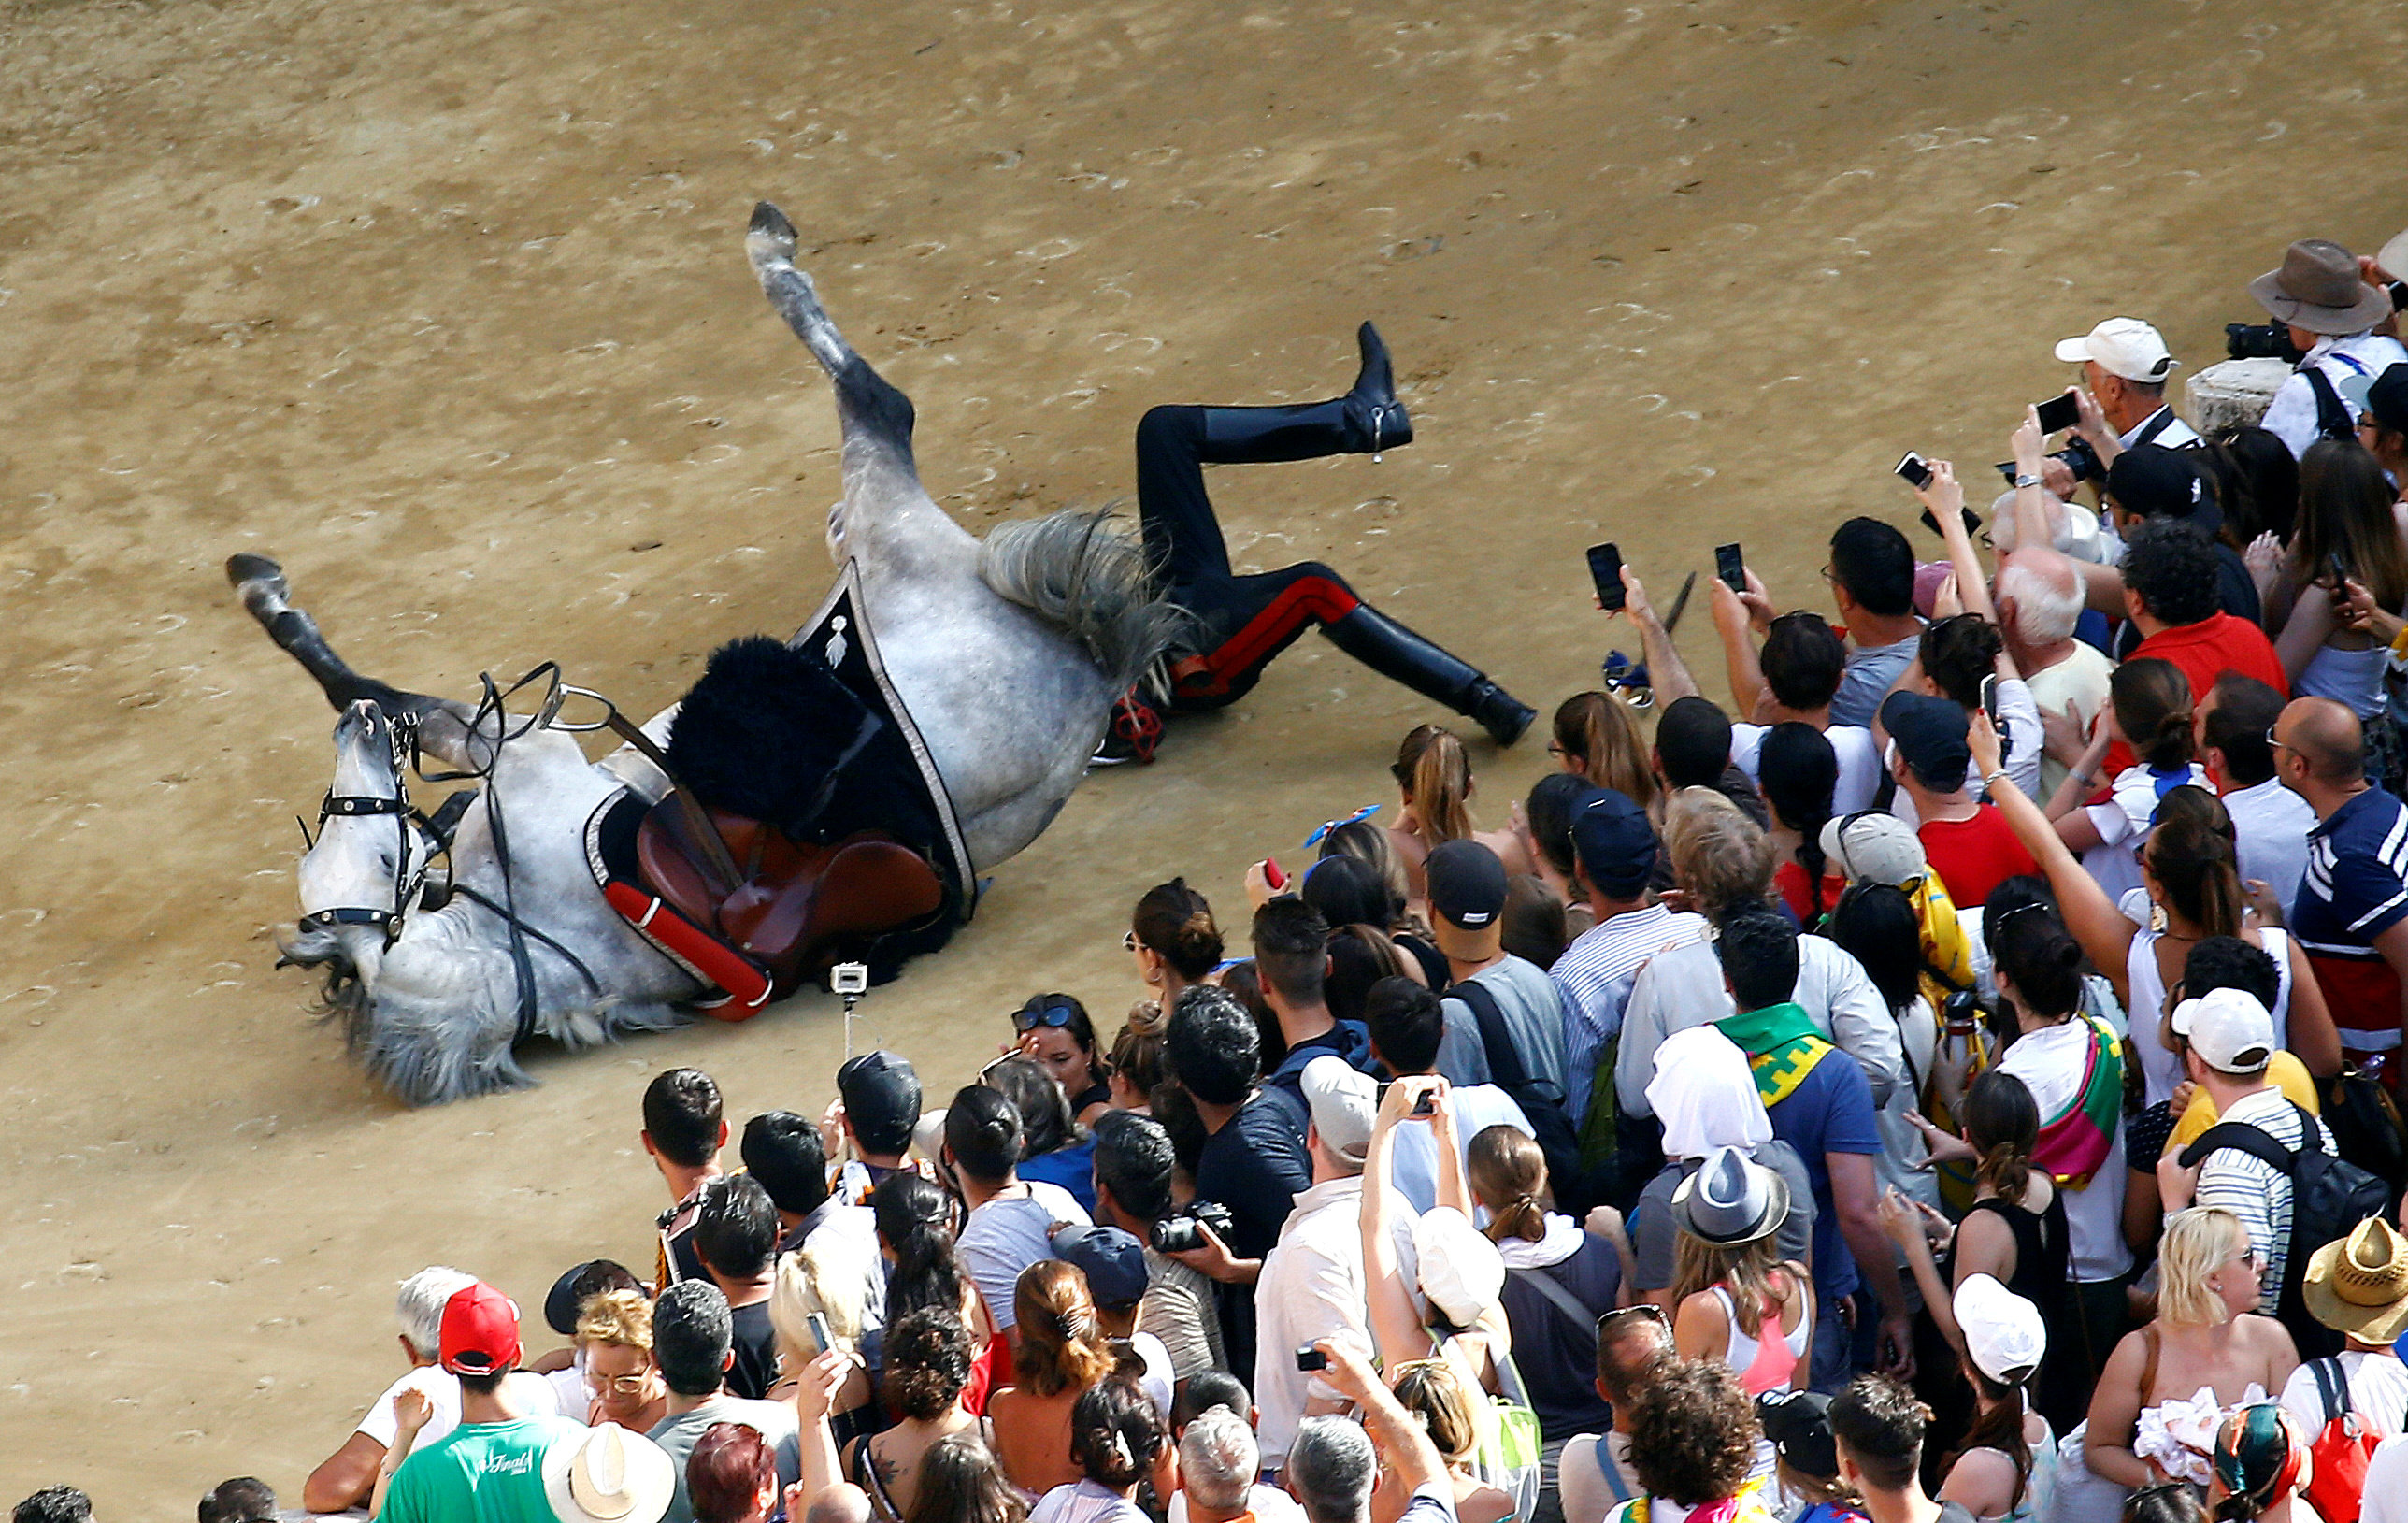 Italian Carabinieri police falls down from his horse during their parade prior the Palio of Siena horse race, Italy, July 2, 2018. REUTERS/Stefano Rellandini TPX IMAGES OF THE DAY